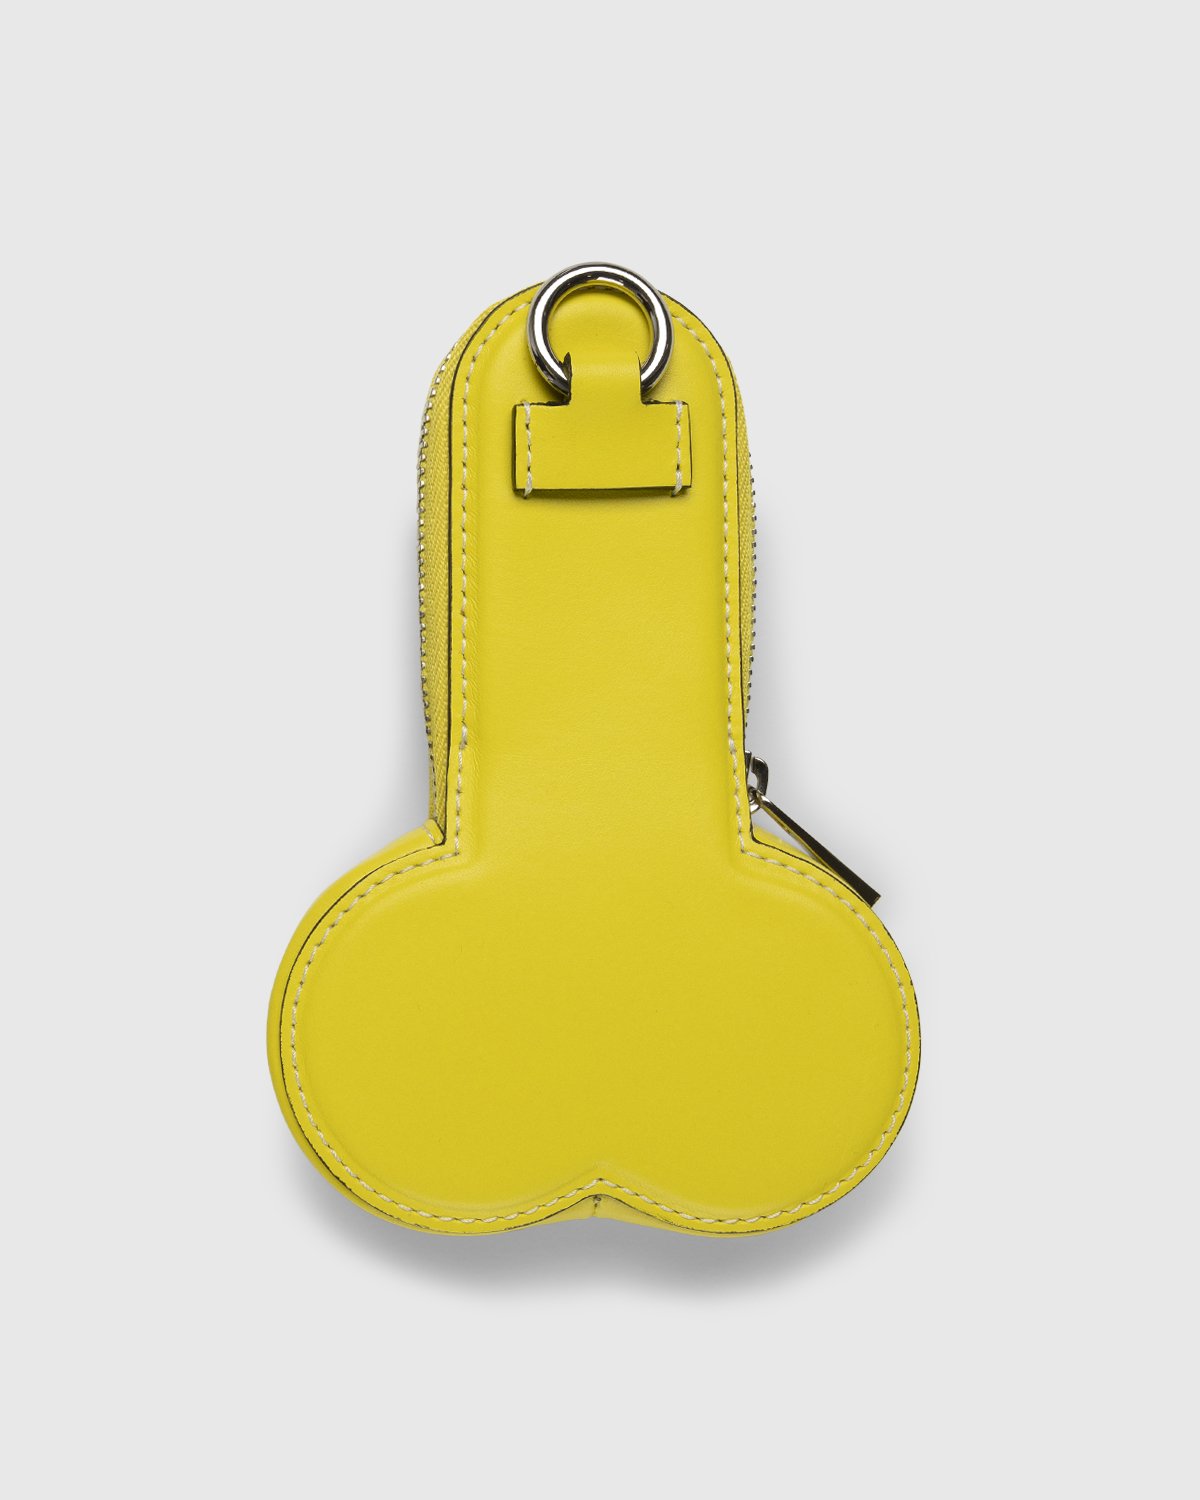 J.W. Anderson - Penis Coin Purse Yellow - Accessories - Yellow - Image 5